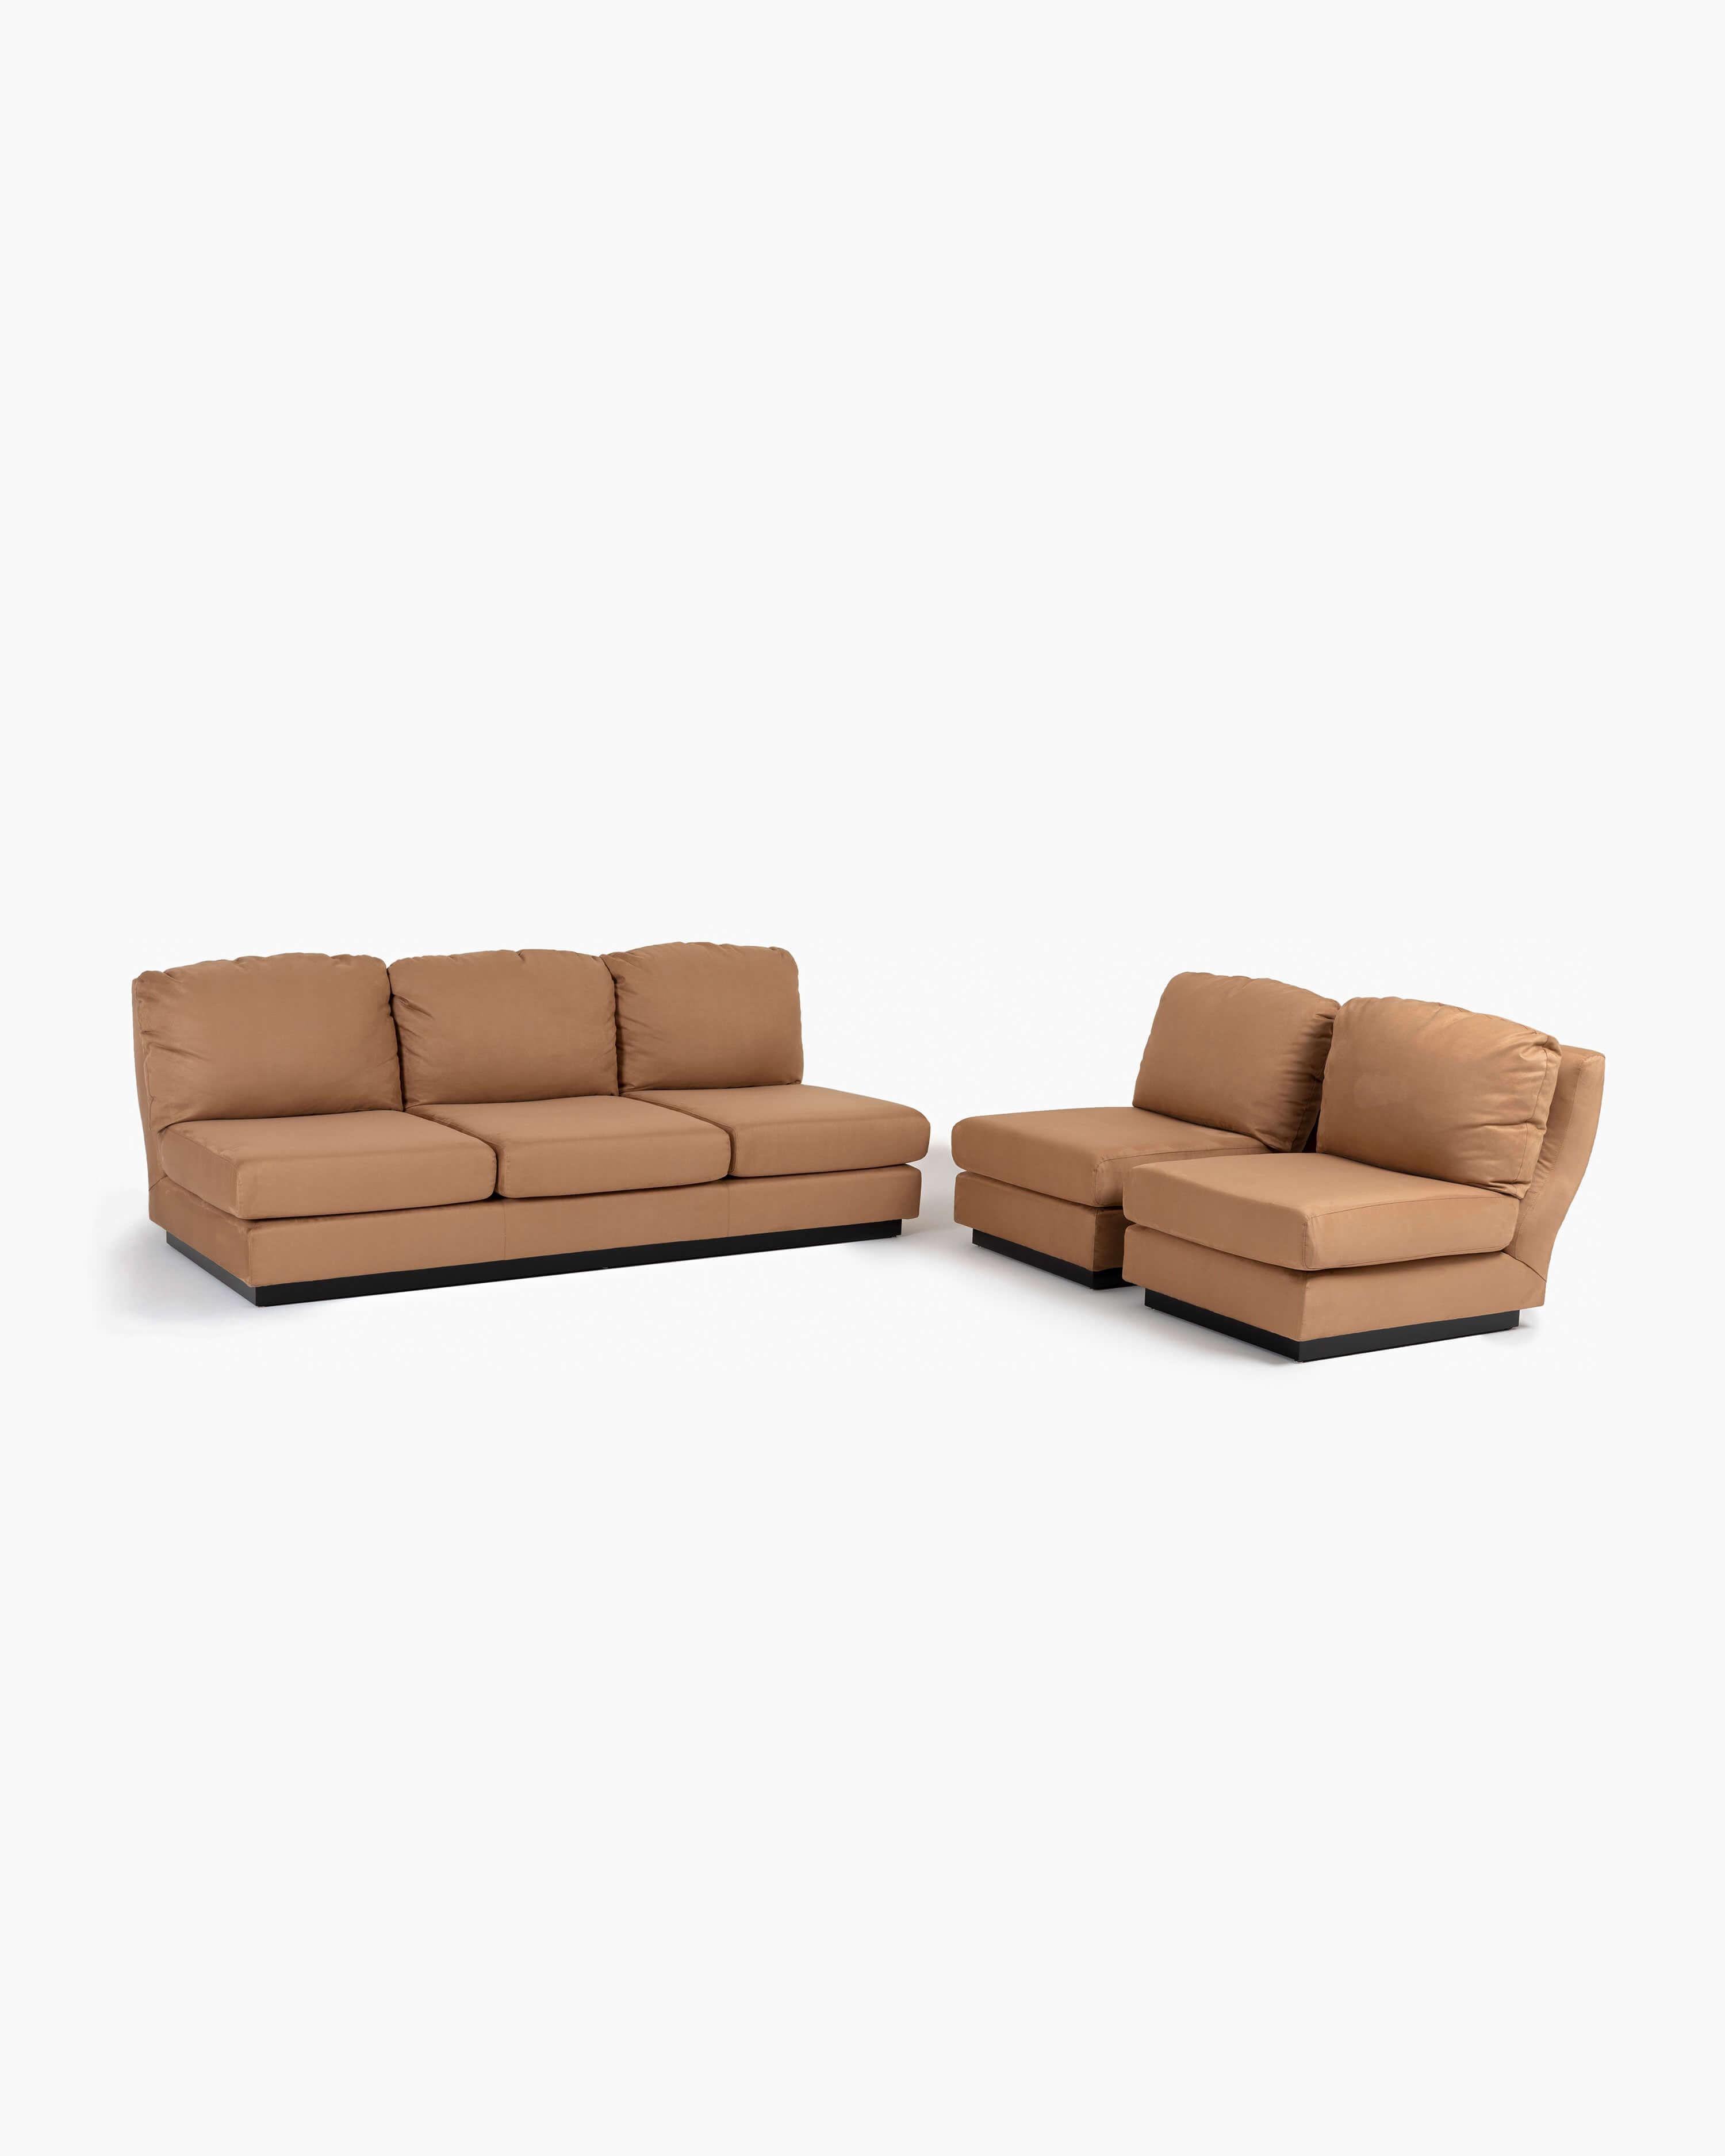 This rare Super C sofa set designed by Willy Rizzo features one three-seater and two single-seat modules, re-upholstered with camel ultrasuede. The modular aspect of Rizzo’s design allows the user to arrange the set to their own liking. Soft, bulky